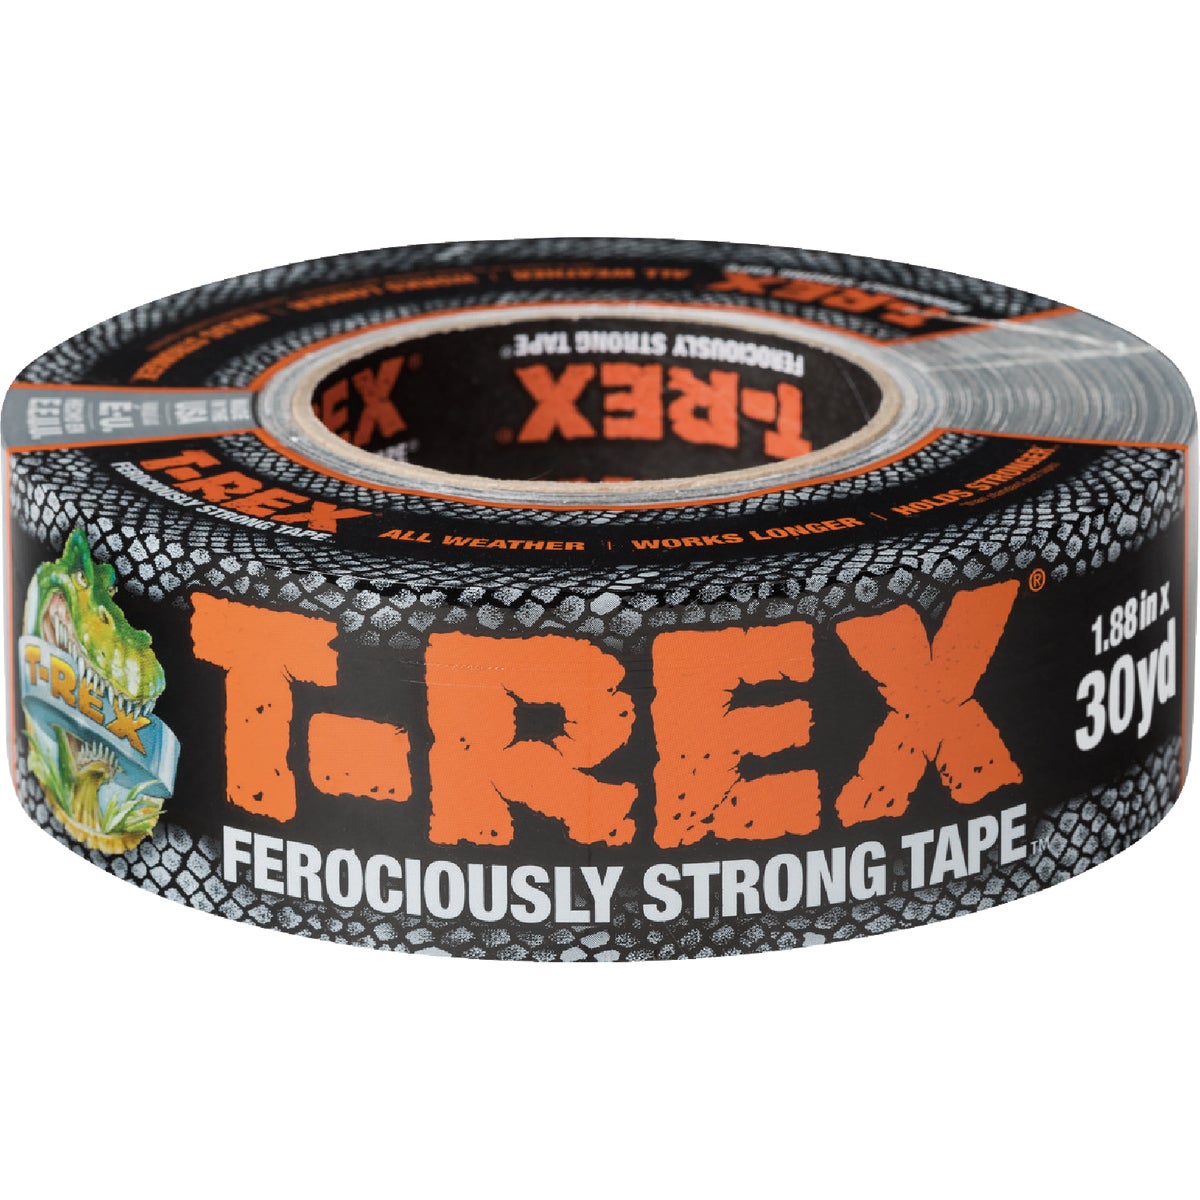 1.88 X 35YD DUCT TAPE